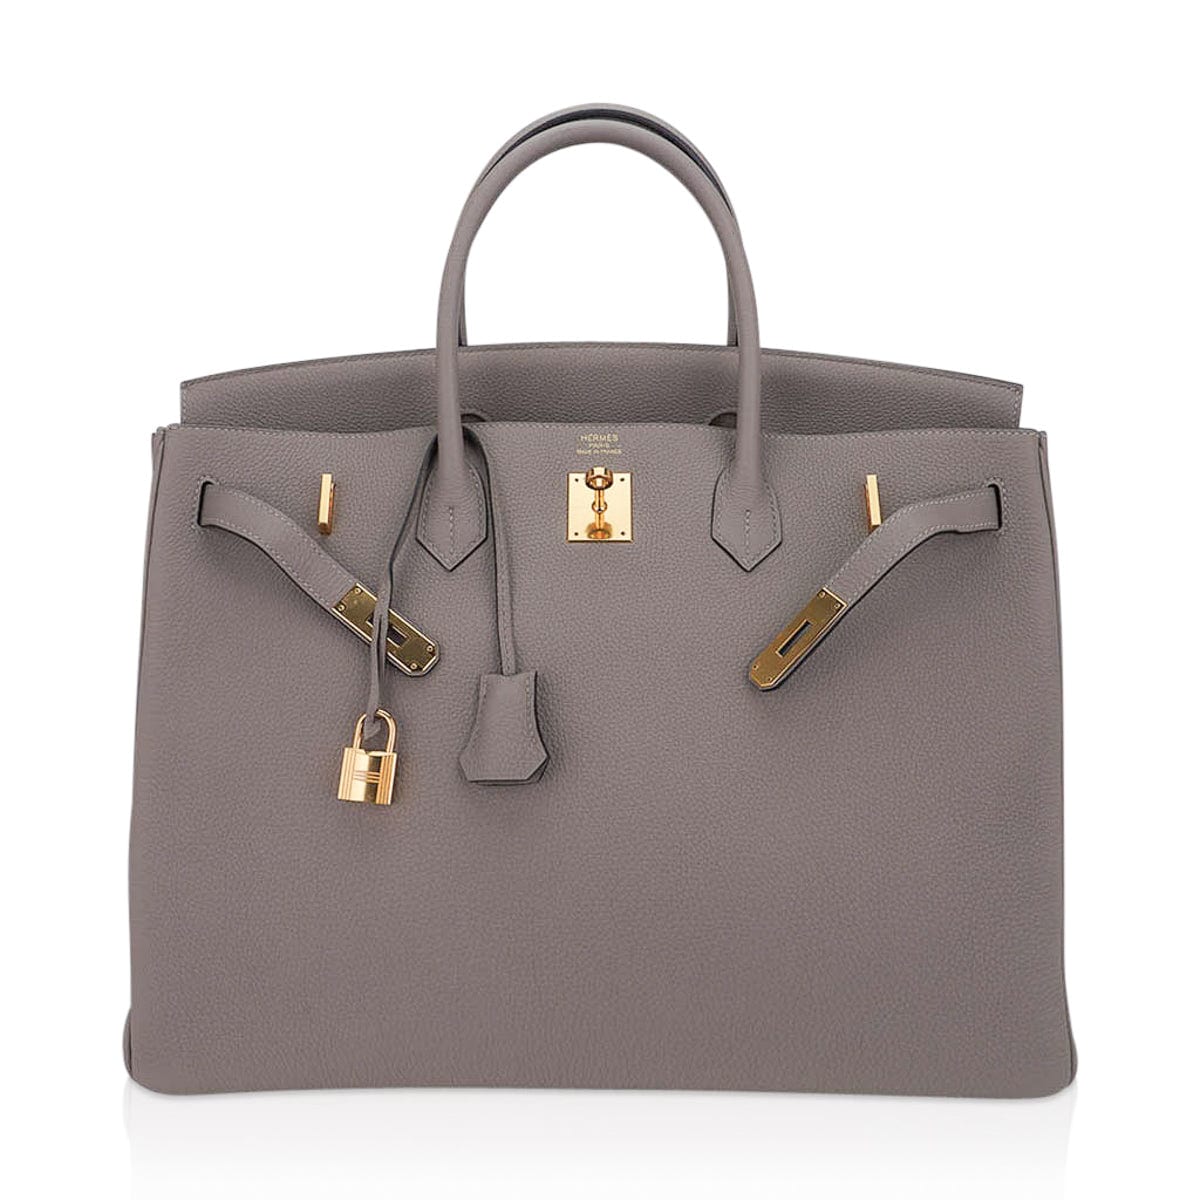 Hermes Limited Edition Birkin 25 Bag in Grizzly Gris Caillou Etoupe Swift  Leather